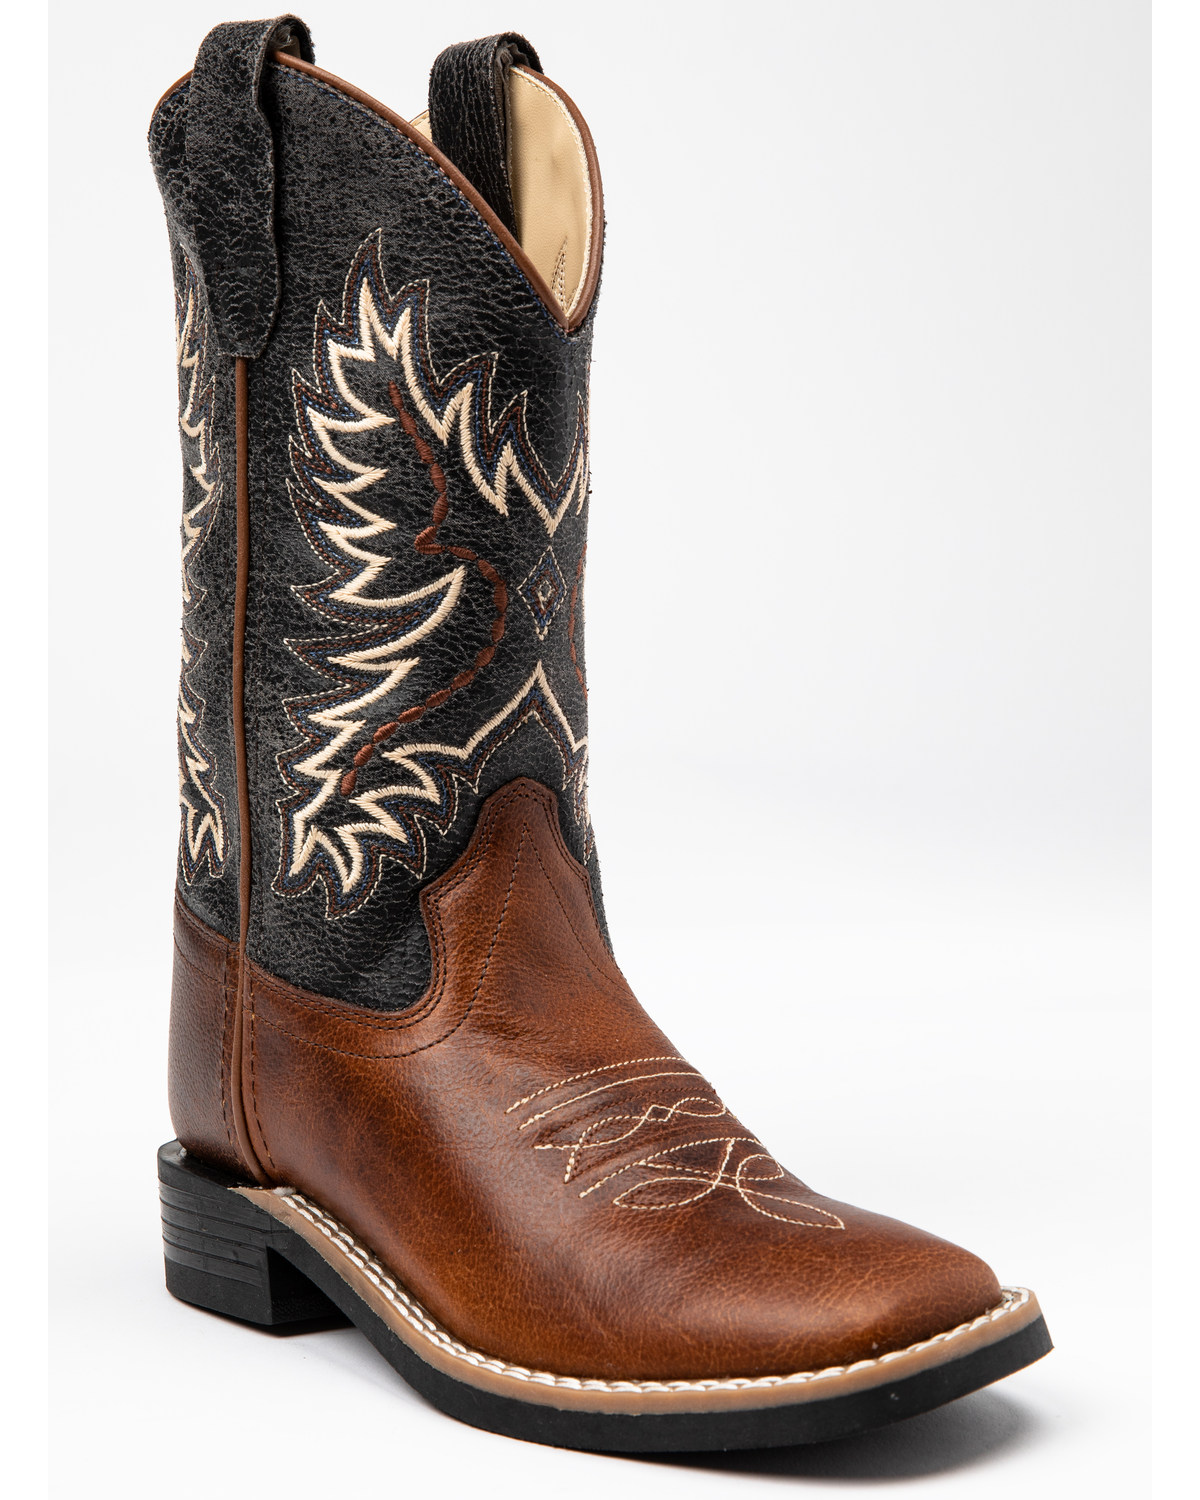 Cody James Boys' Ryder Western Boots - Square Toe